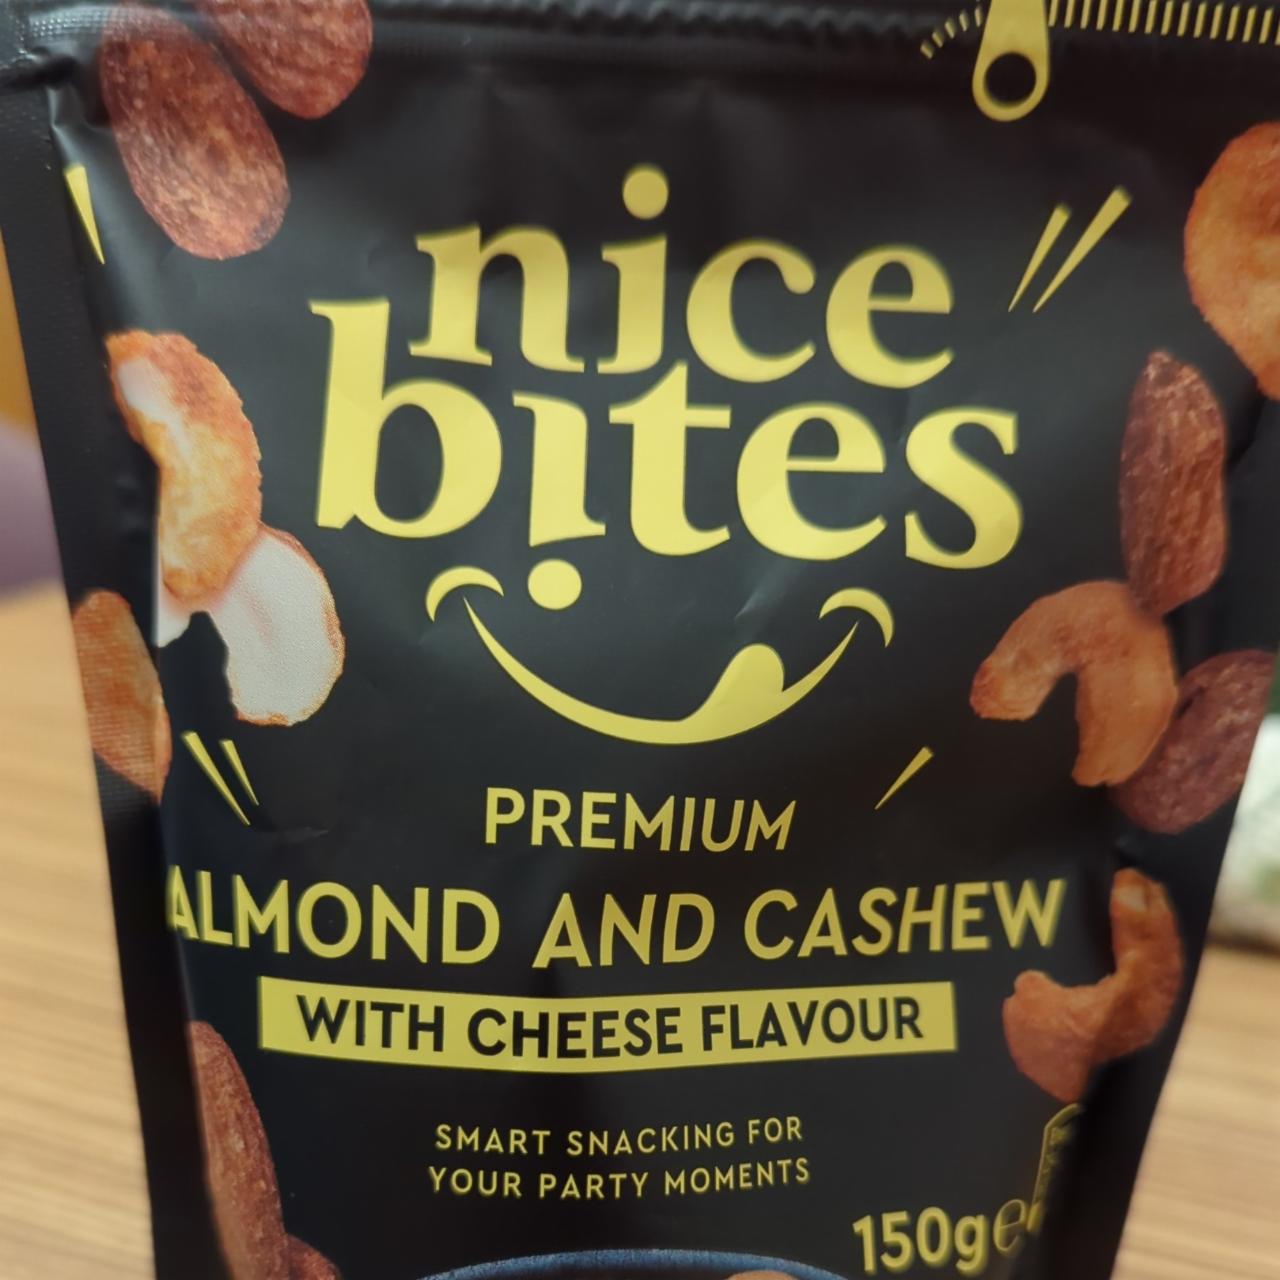 Fotografie - Premium Almond and Cashew with cheese flavour Nice Bites